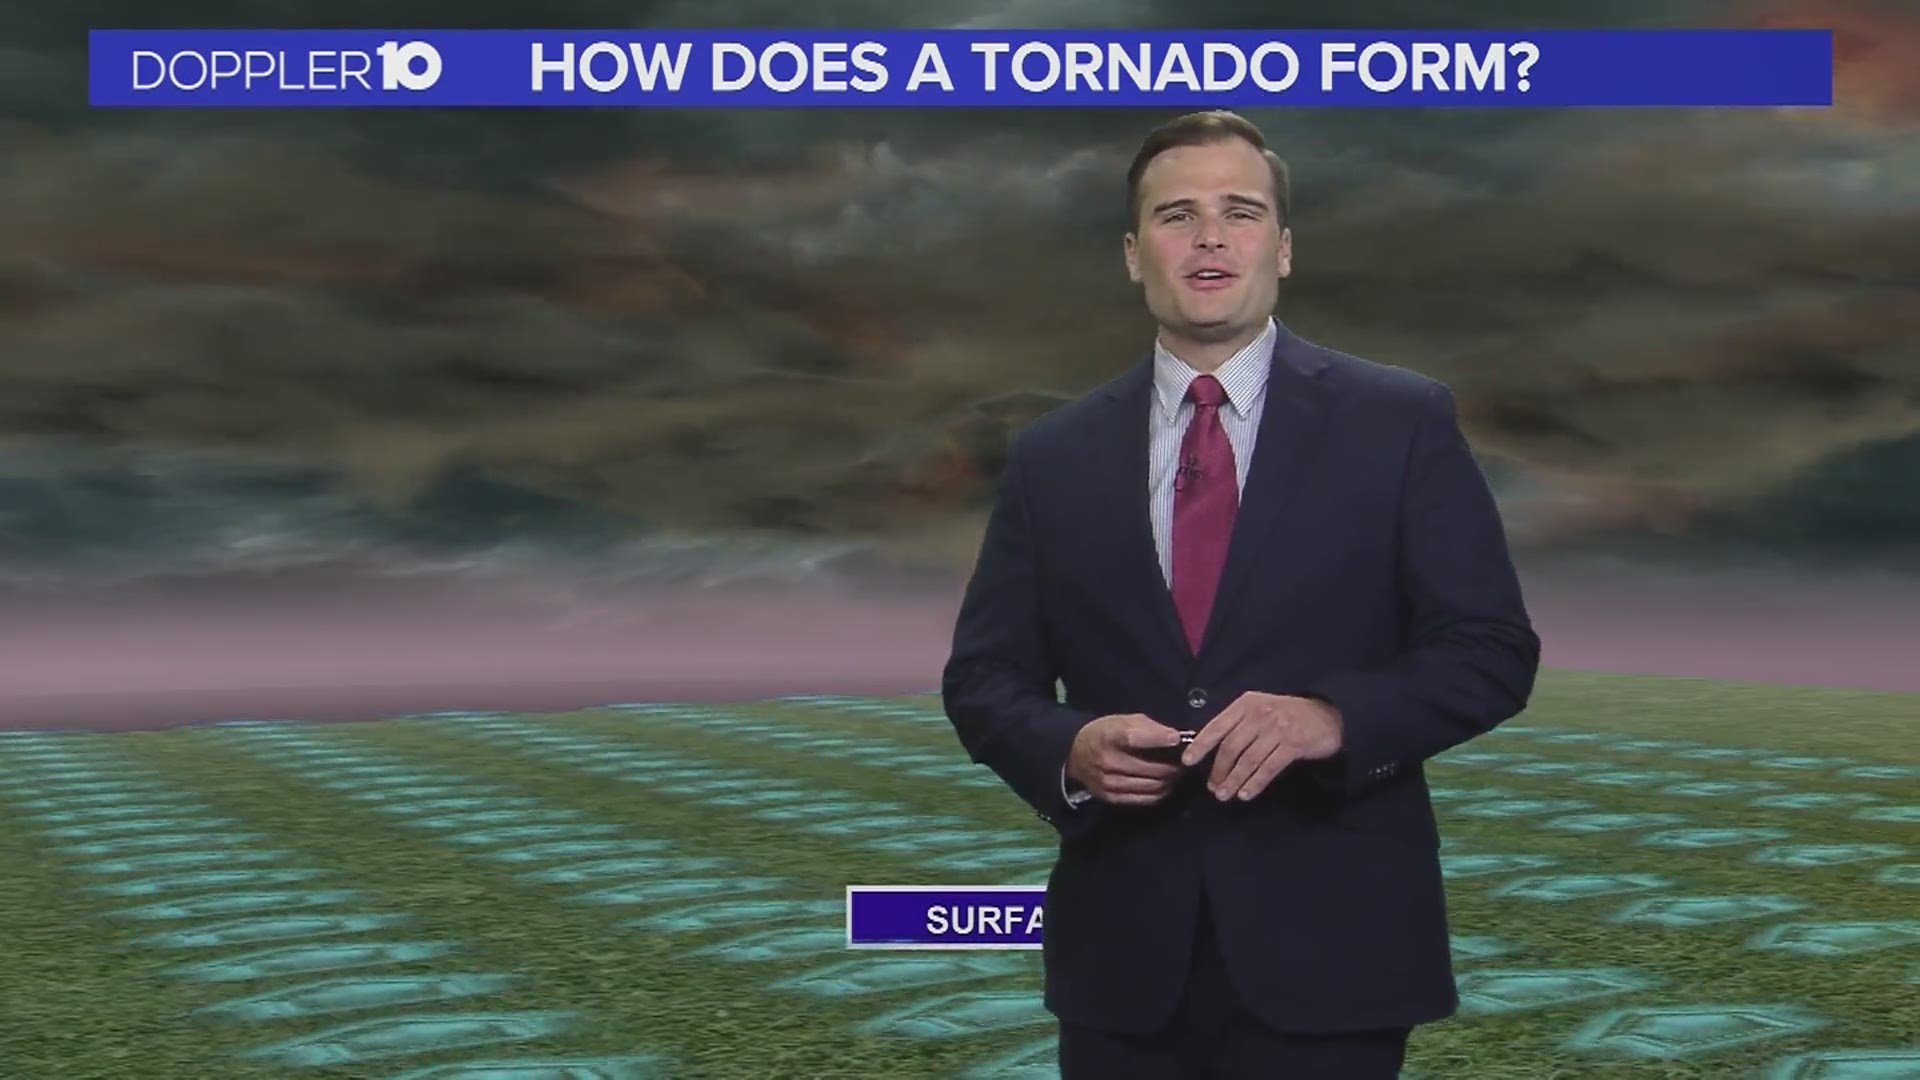 Doppler 10 meteorologist Ross Caruso explains what ingredients are needed for a tornado to form.